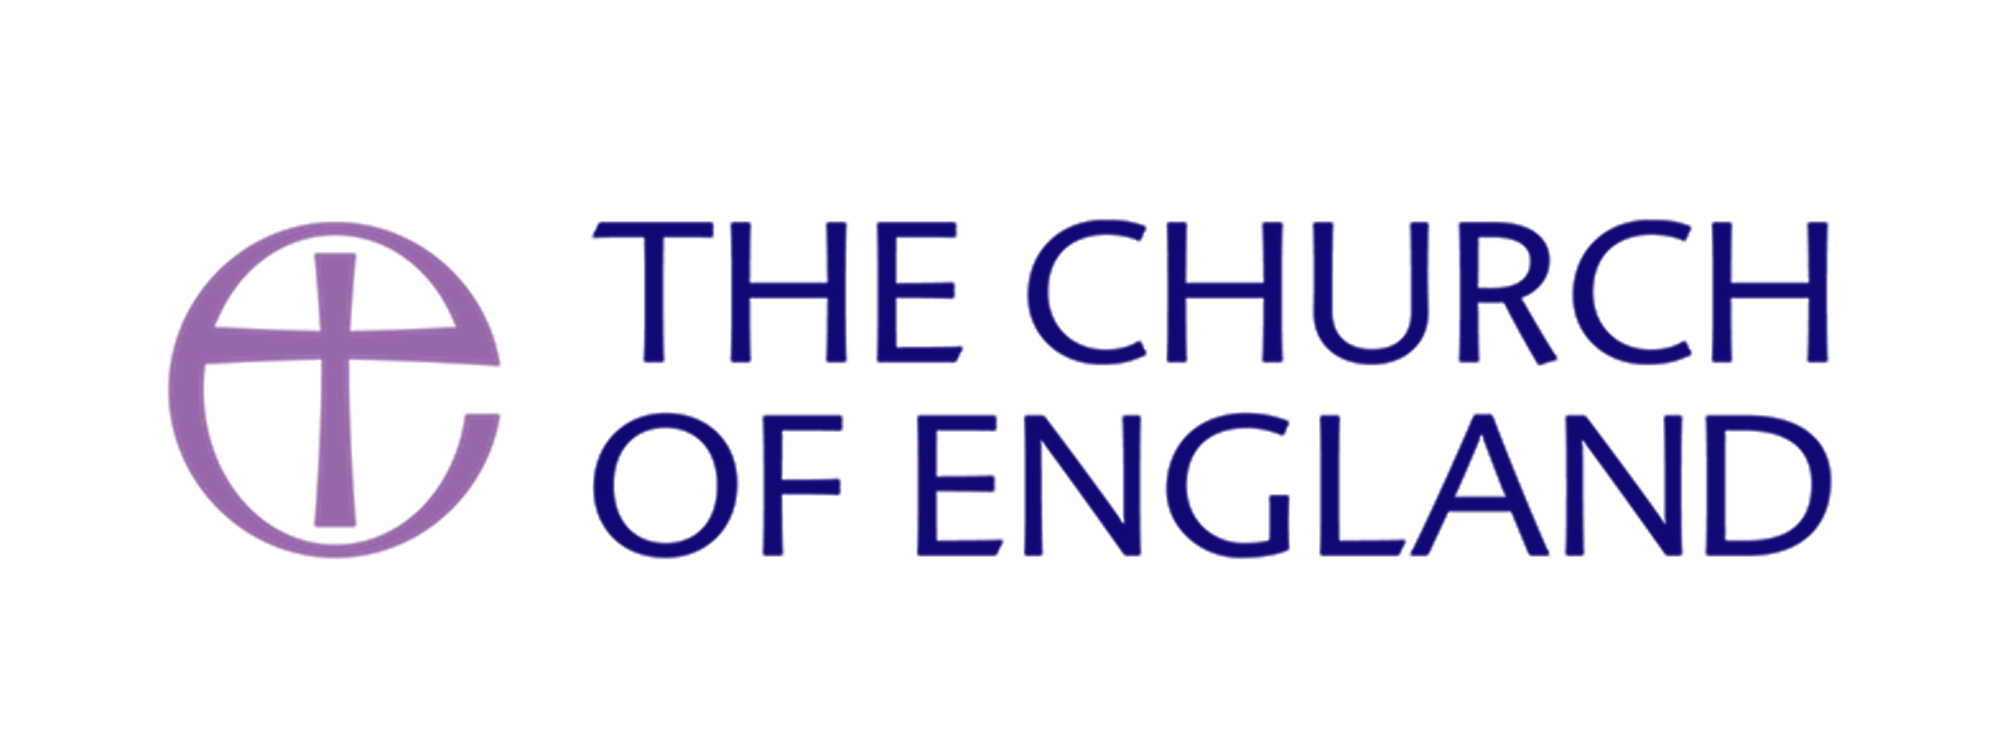 Inline image - The Church of E